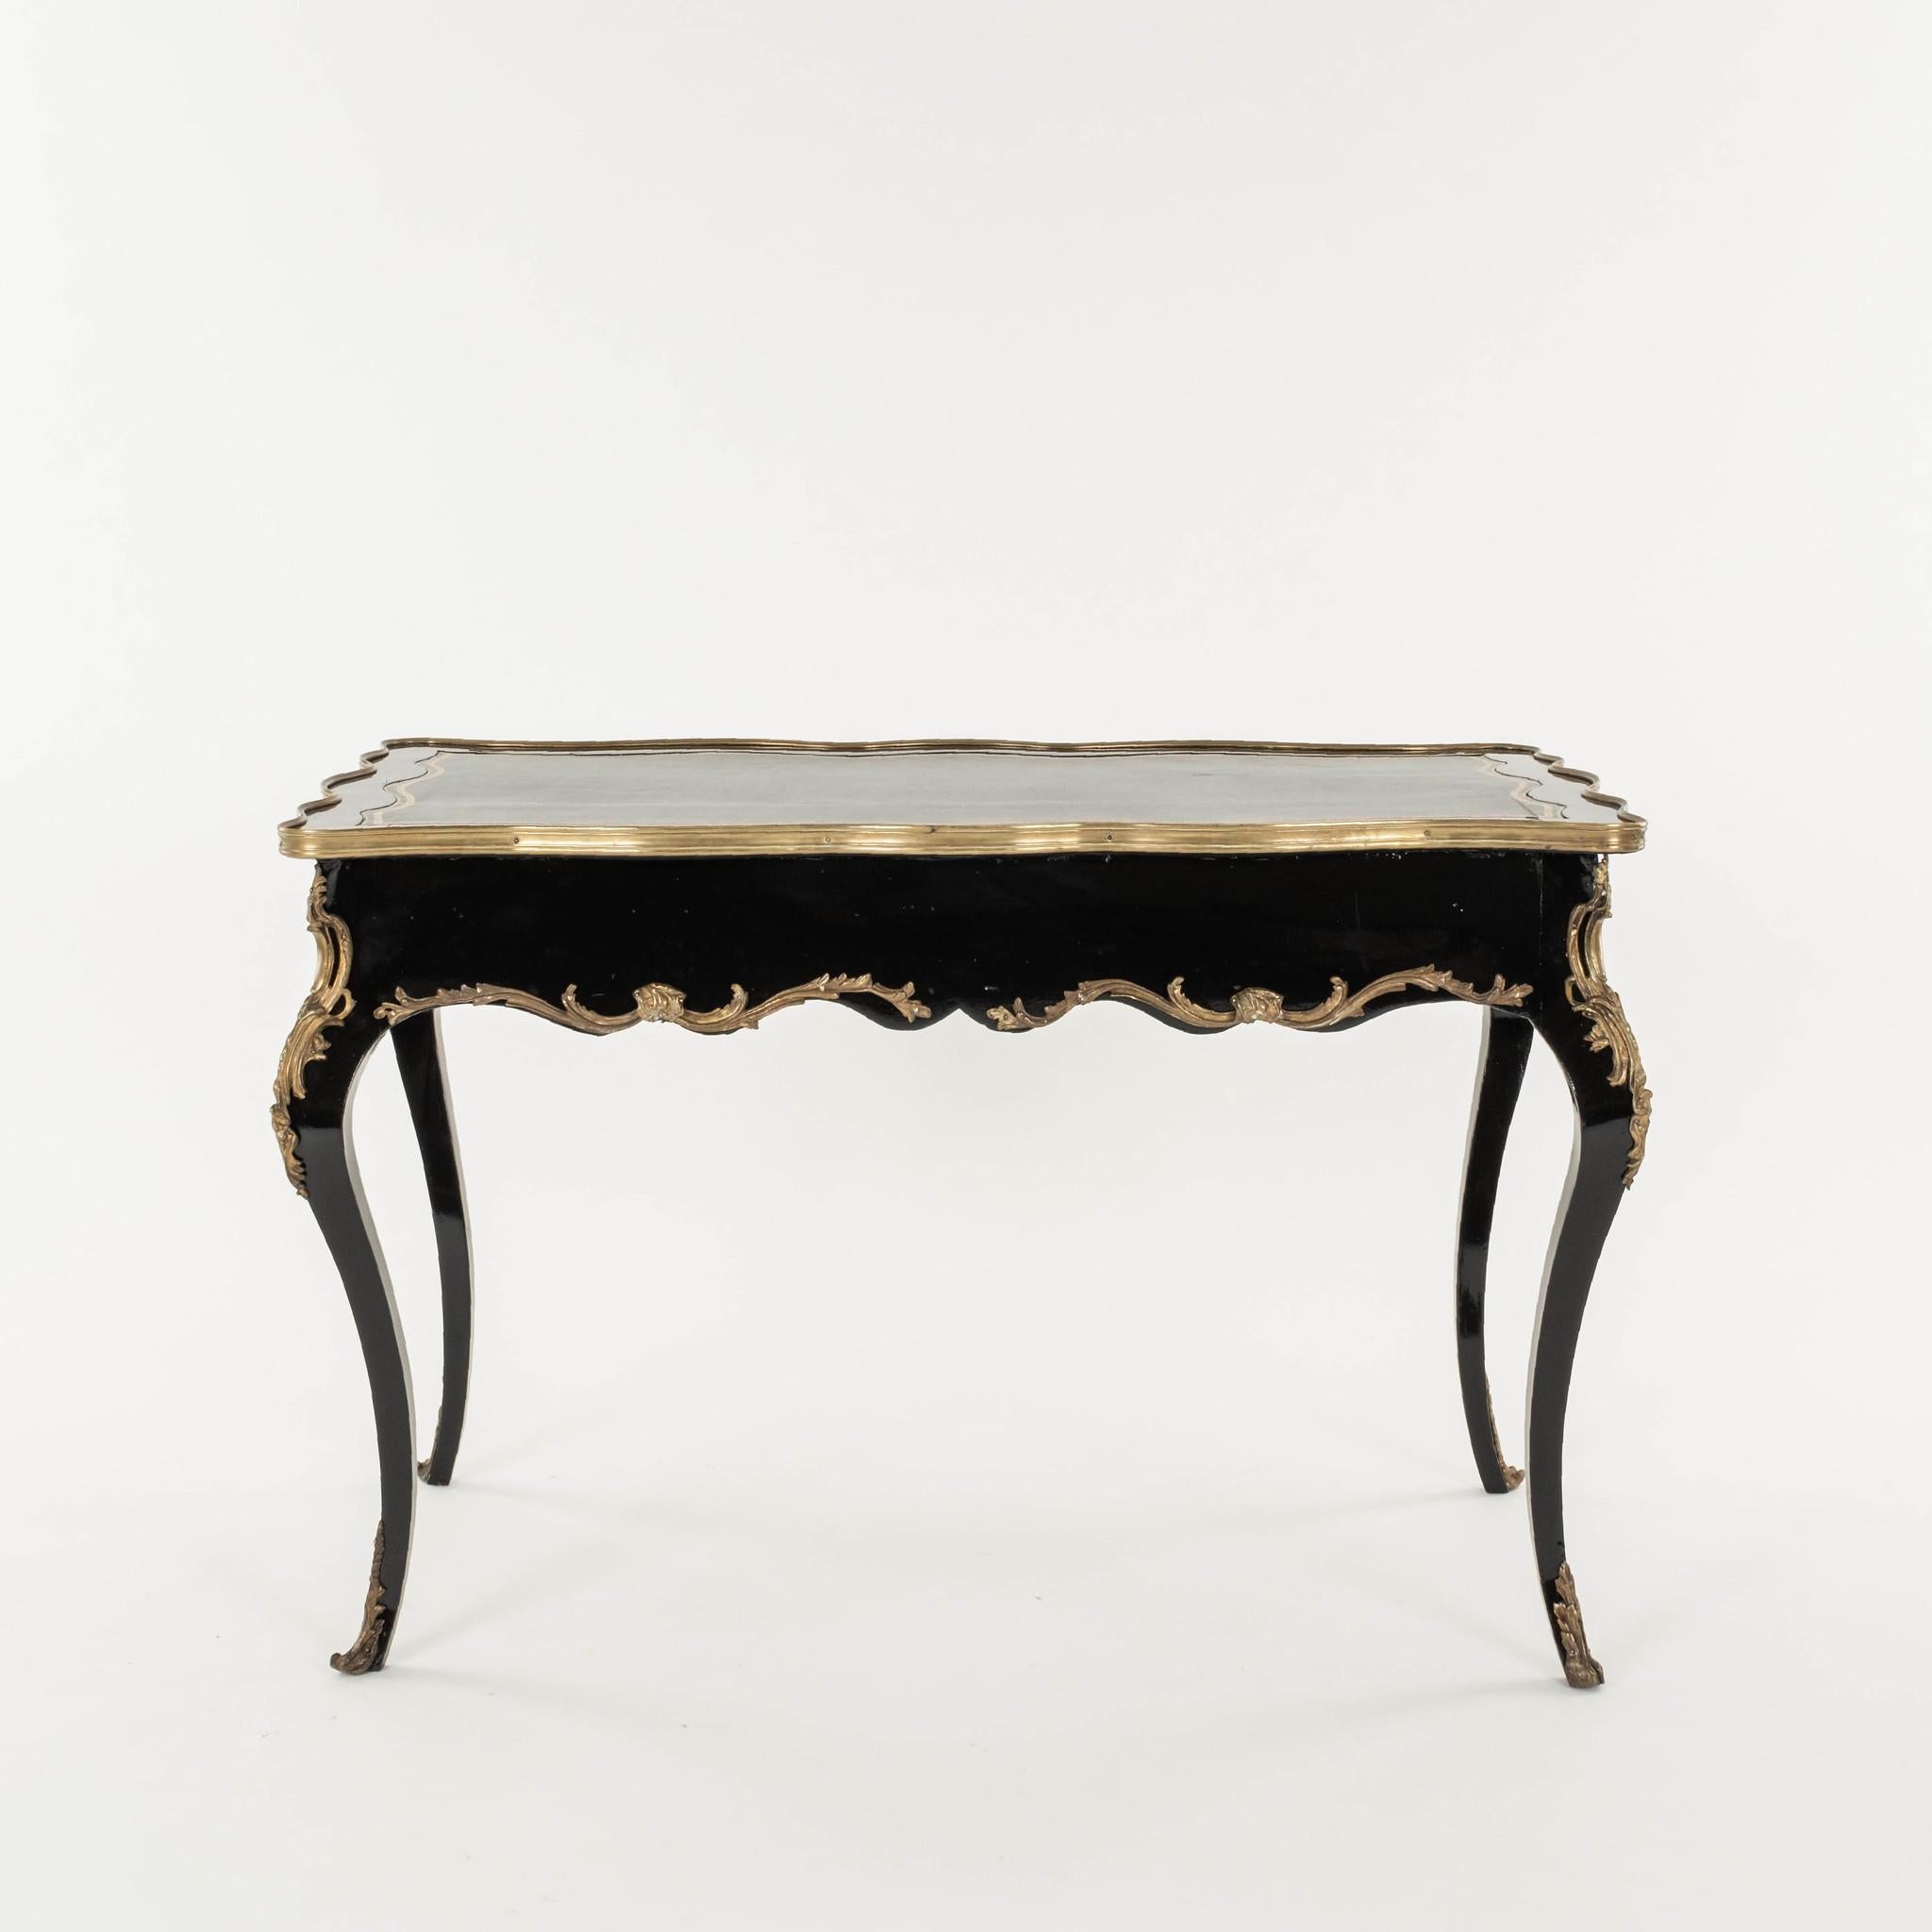 19th Century glossy ebonized Louis XV style bureau plat with lovely bronze ormolu and black leather top with gilded embossing.